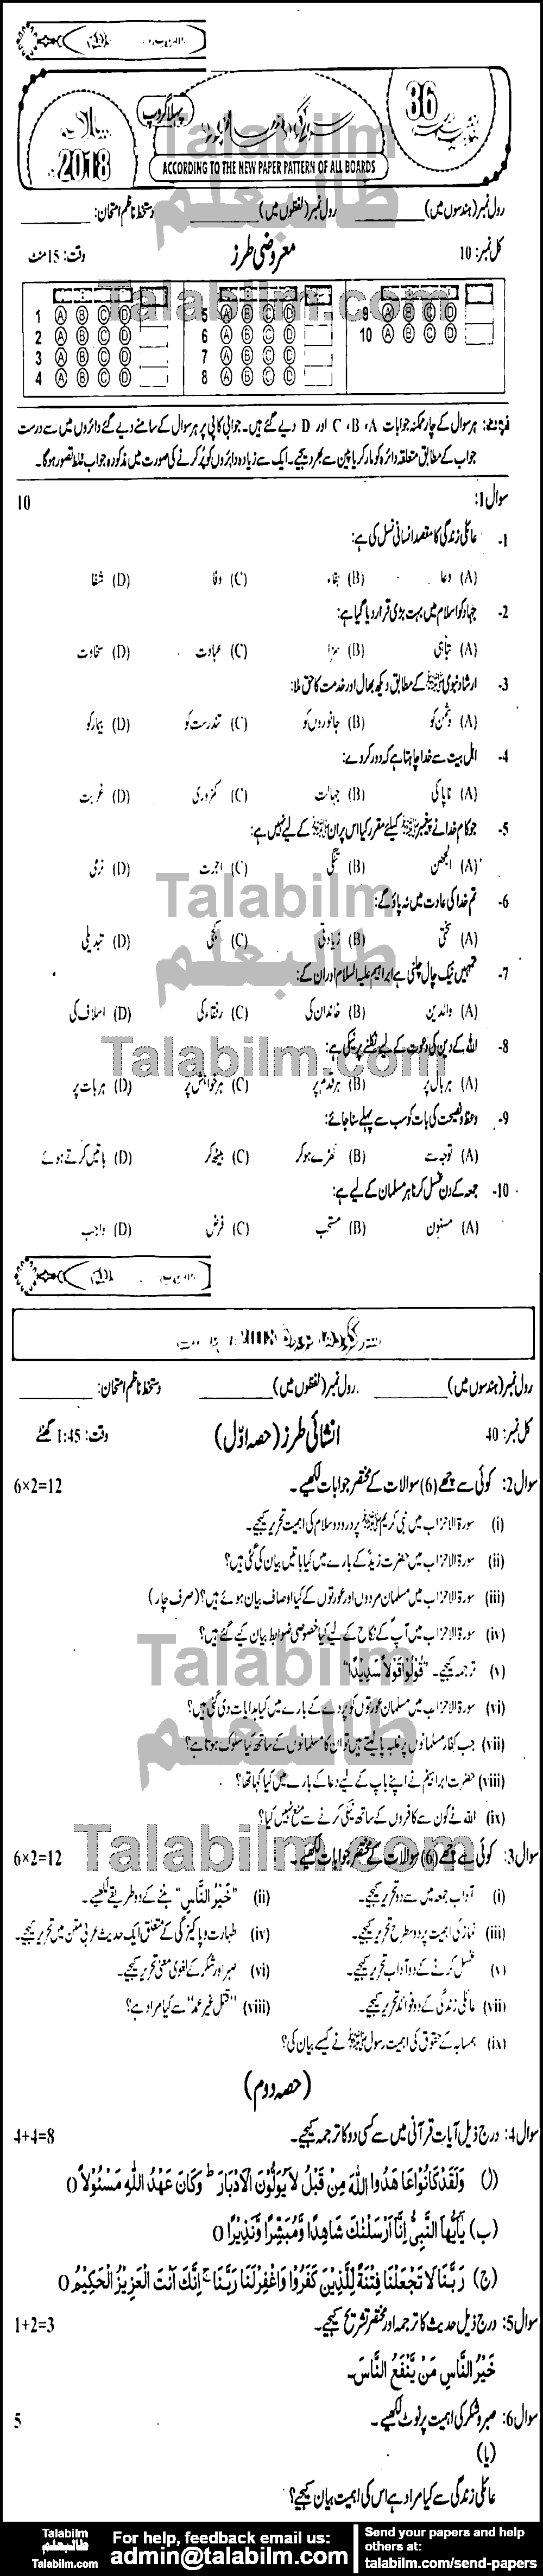 Islamiat Compulsory 0 past paper for 2018 Group-I